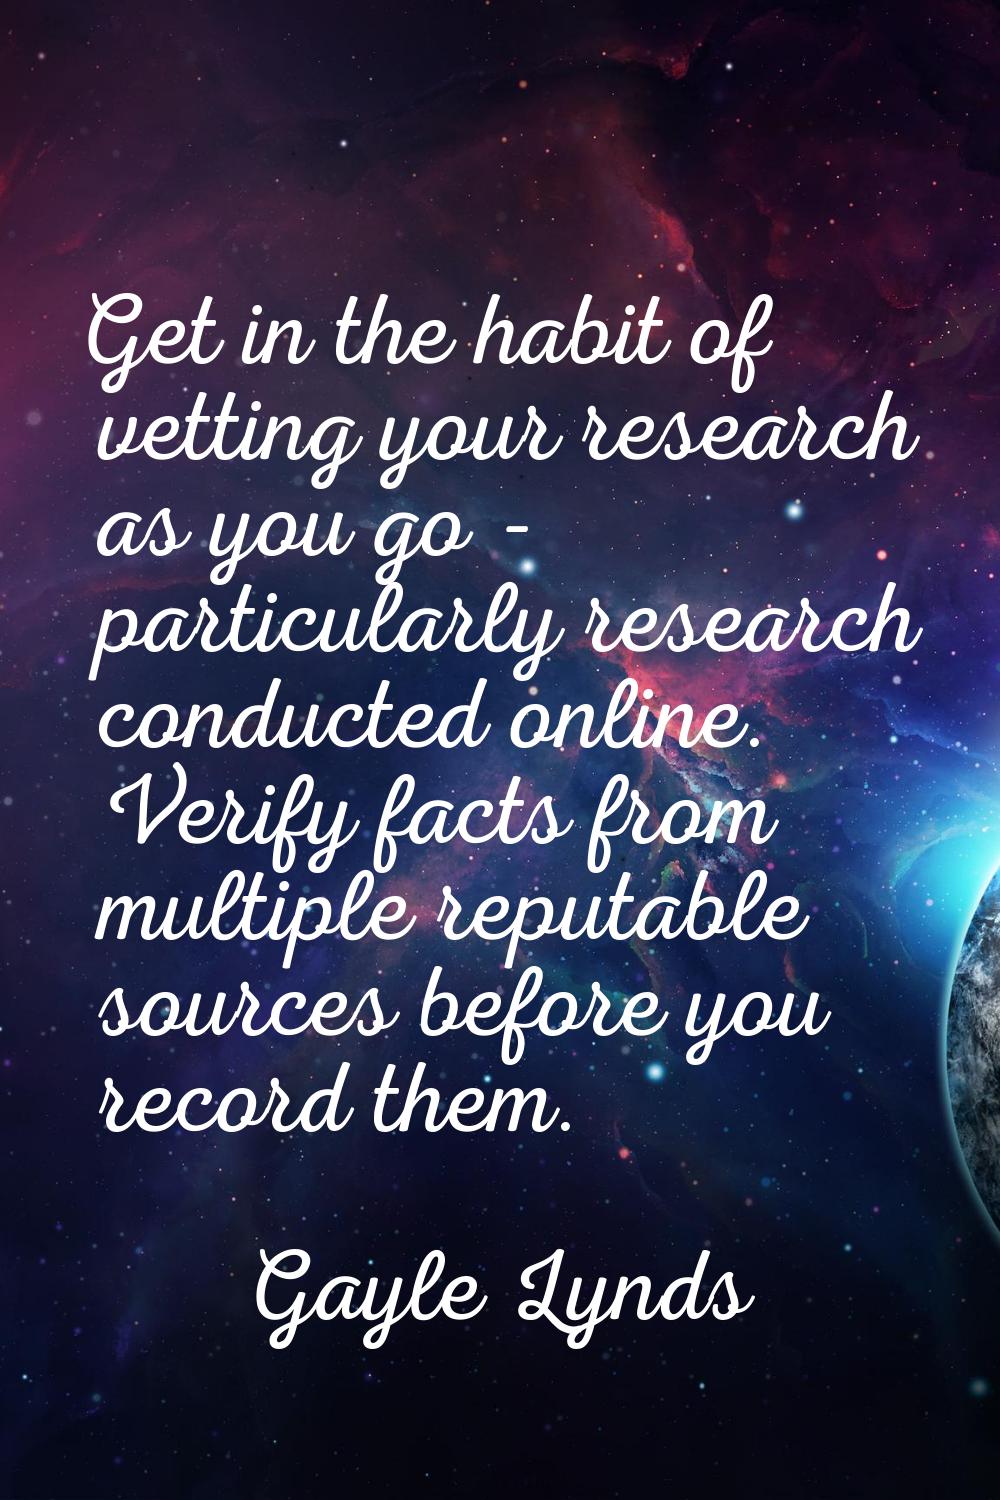 Get in the habit of vetting your research as you go - particularly research conducted online. Verif